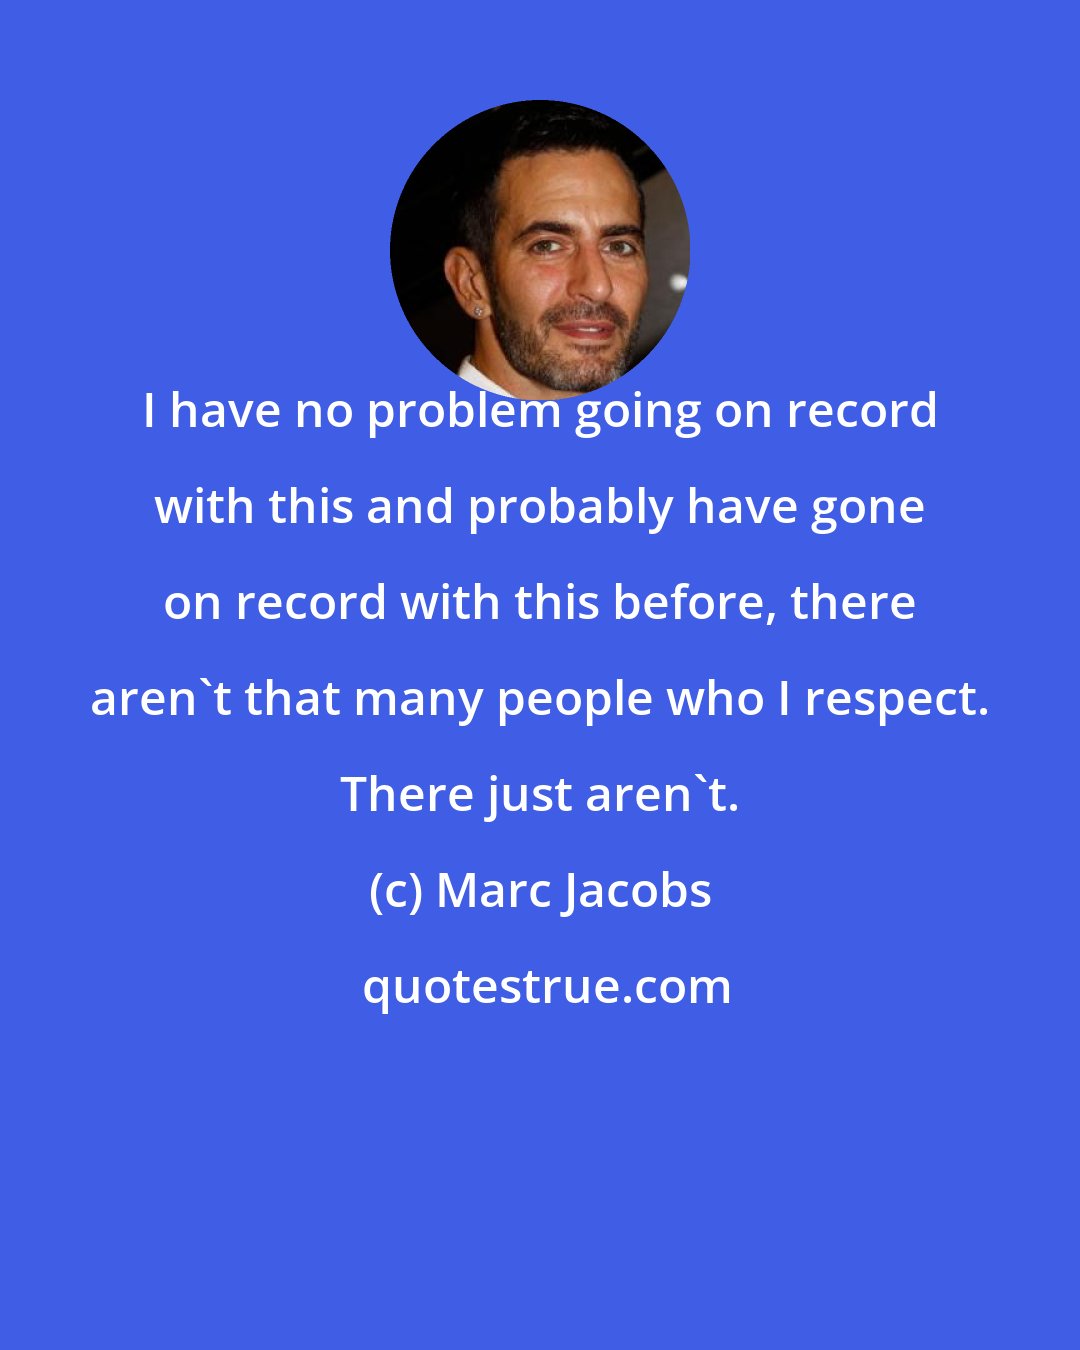 Marc Jacobs: I have no problem going on record with this and probably have gone on record with this before, there aren't that many people who I respect. There just aren't.